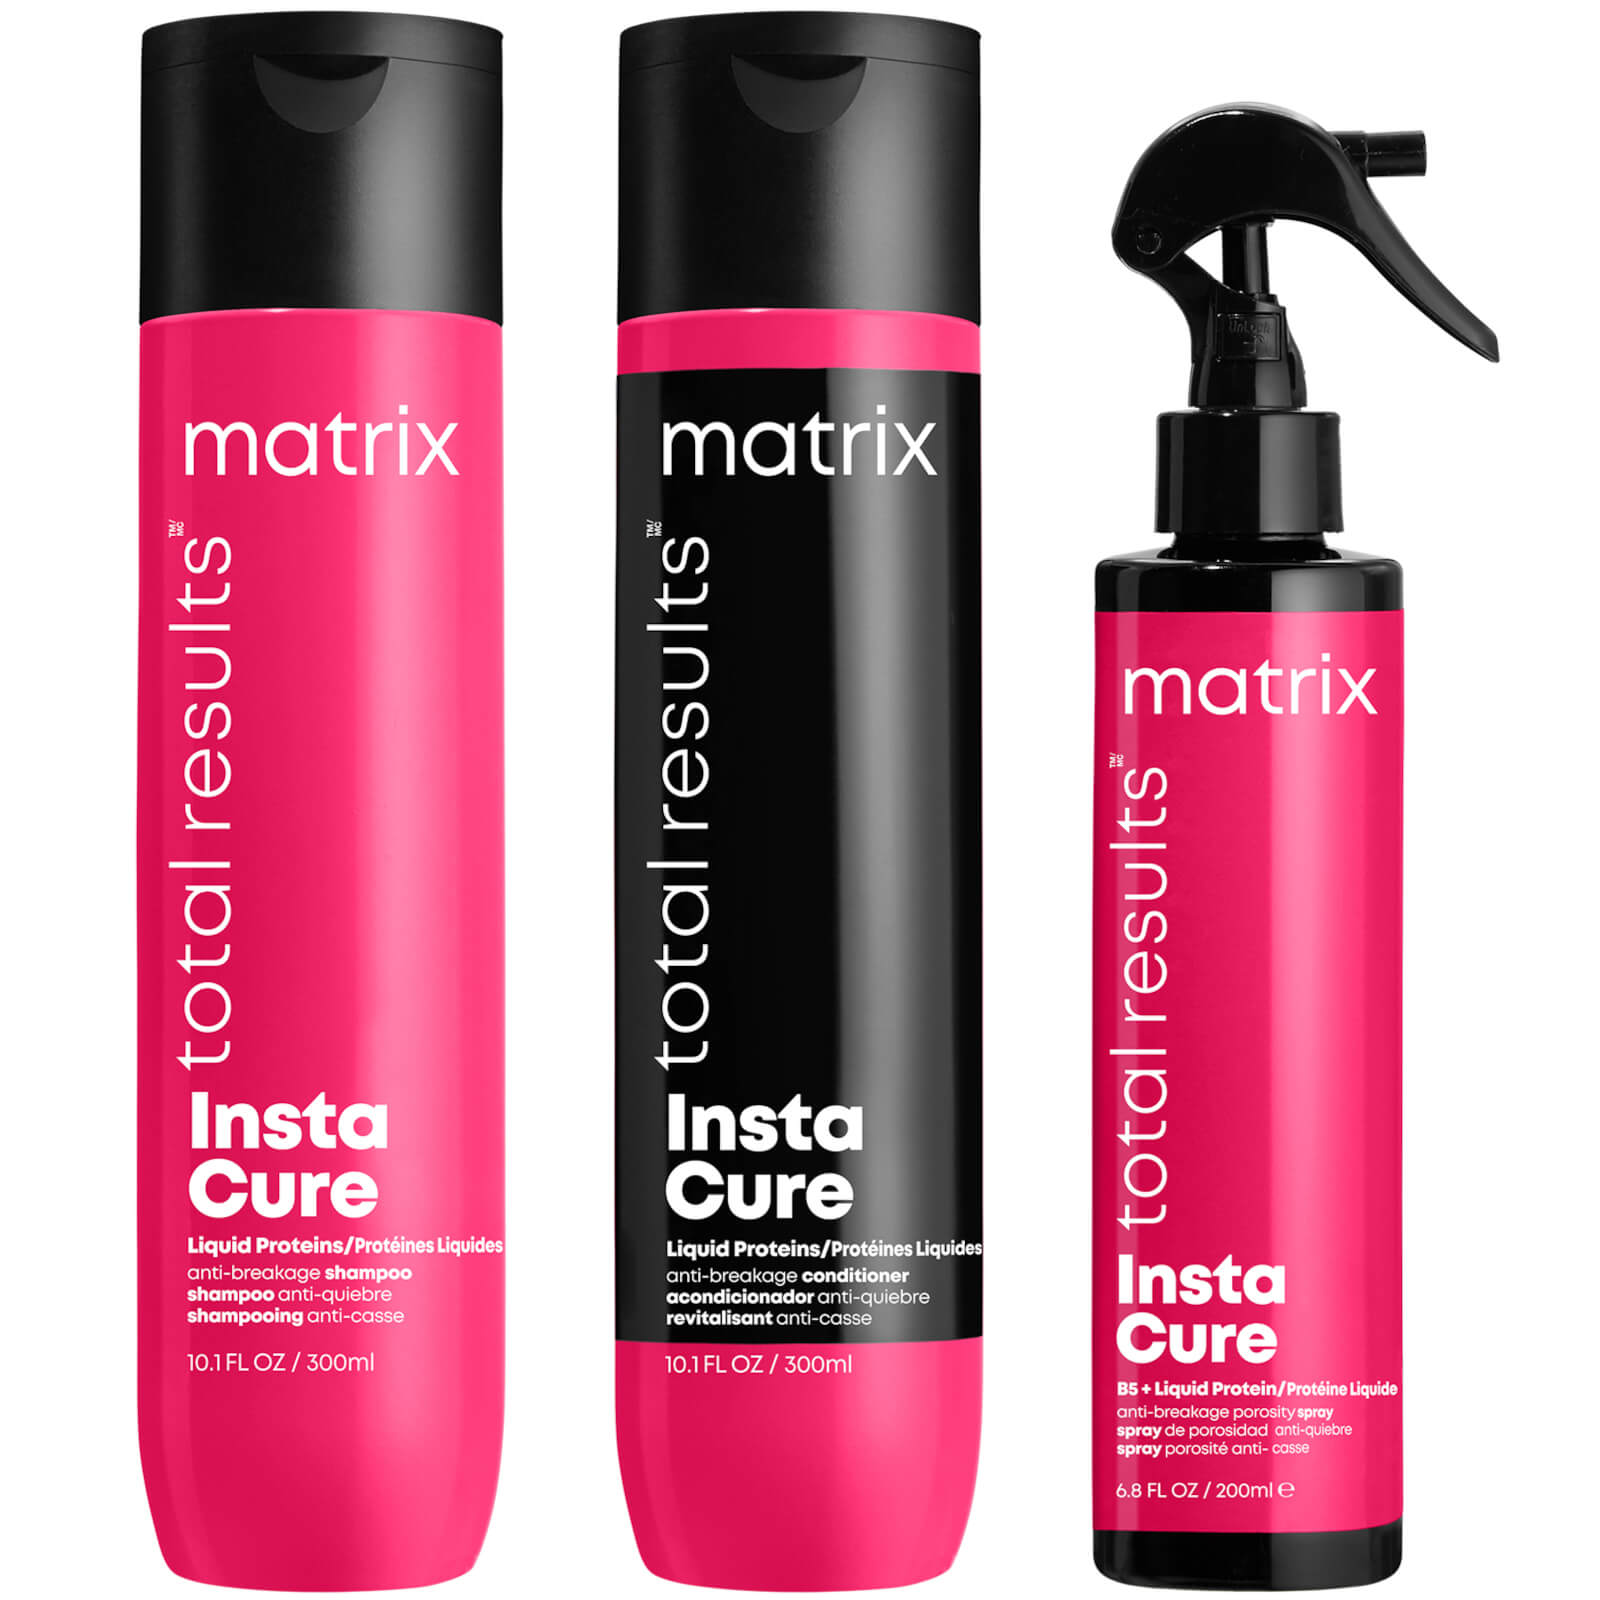 Image of Matrix Total Results InstaCure Anti-Breakage Shampoo, Conditioner and Hair Spray Routine for Damaged Hair